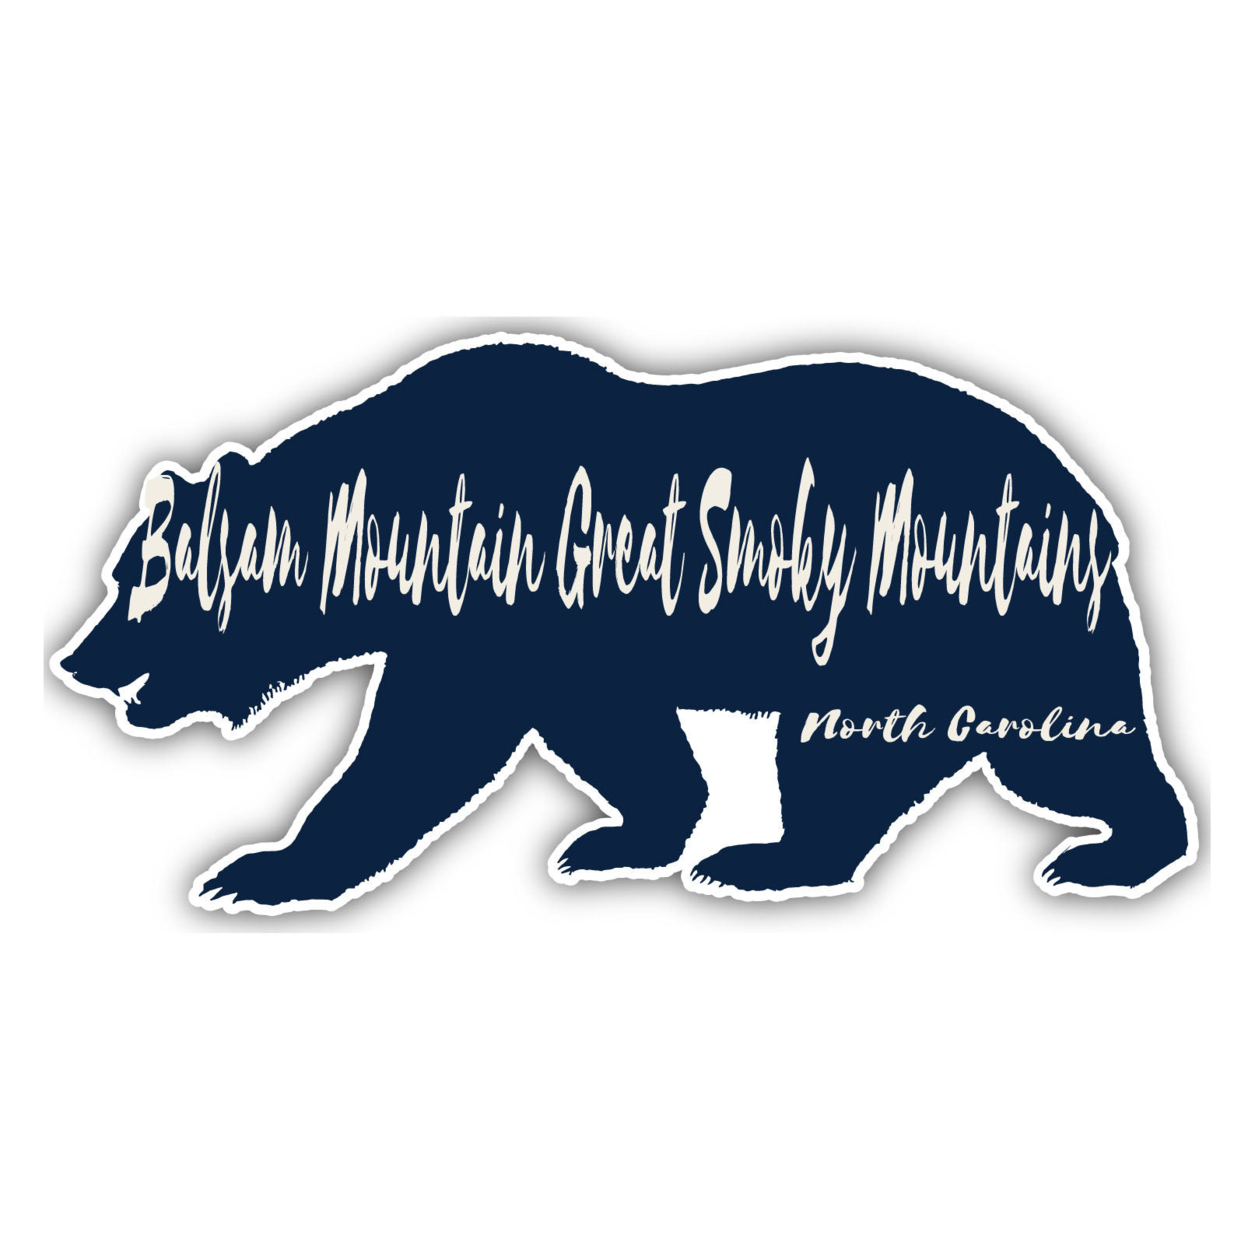 Balsam Mountain Great Smoky Mountains North Carolina Souvenir Decorative Stickers (Choose Theme And Size) - 4-Pack, 8-Inch, Bear